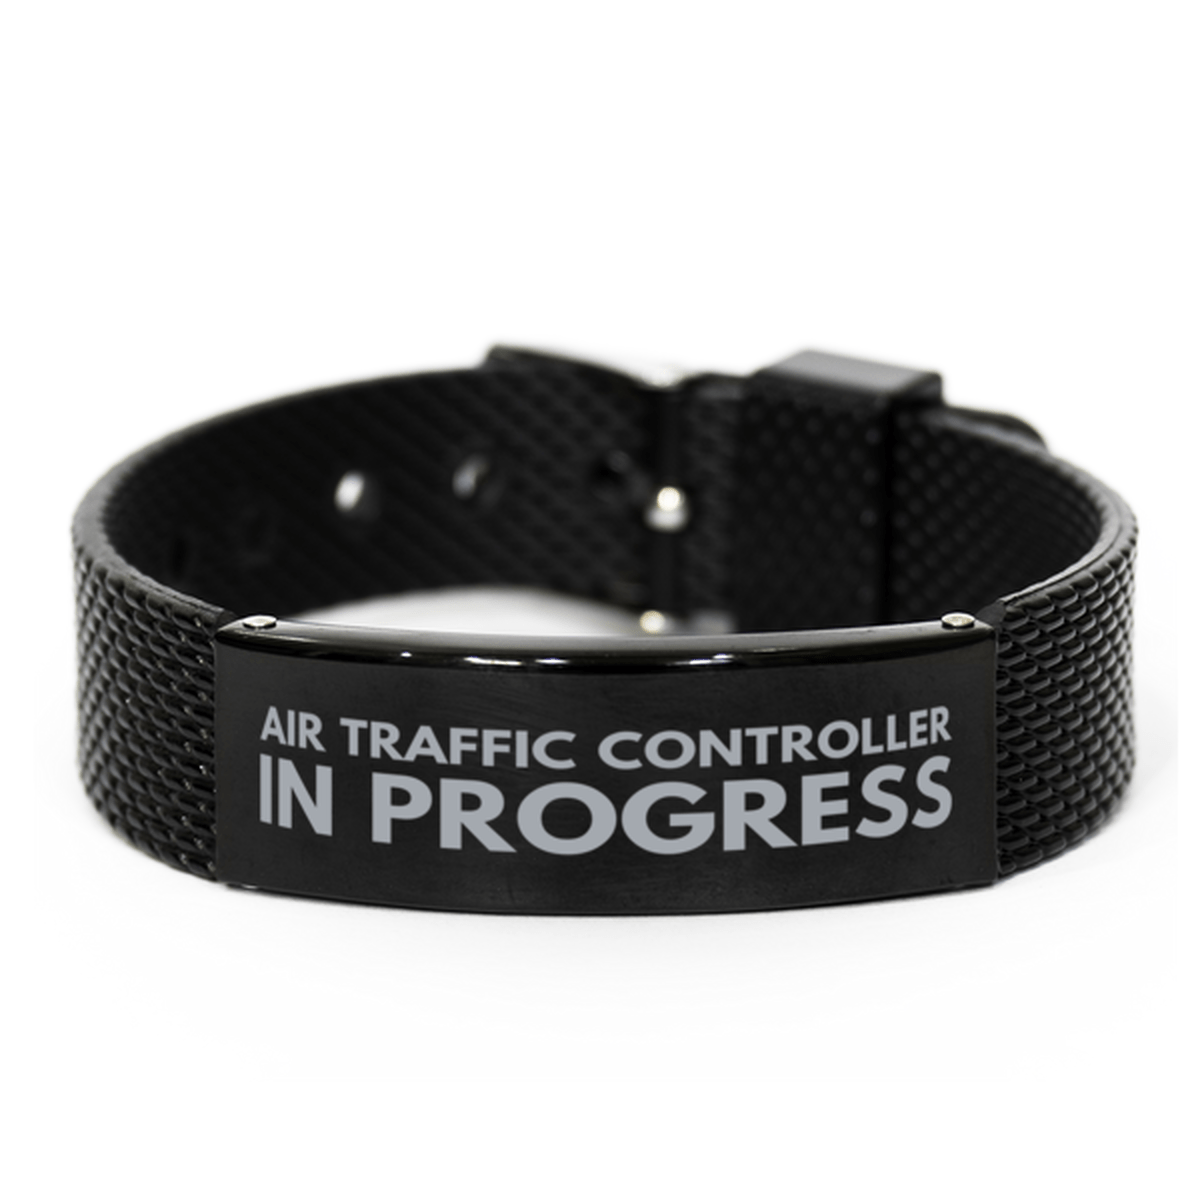 Inspirational Air Traffic Controller Black Shark Mesh Bracelet, Air Traffic Controller In Progress, Best Graduation Gifts for Students